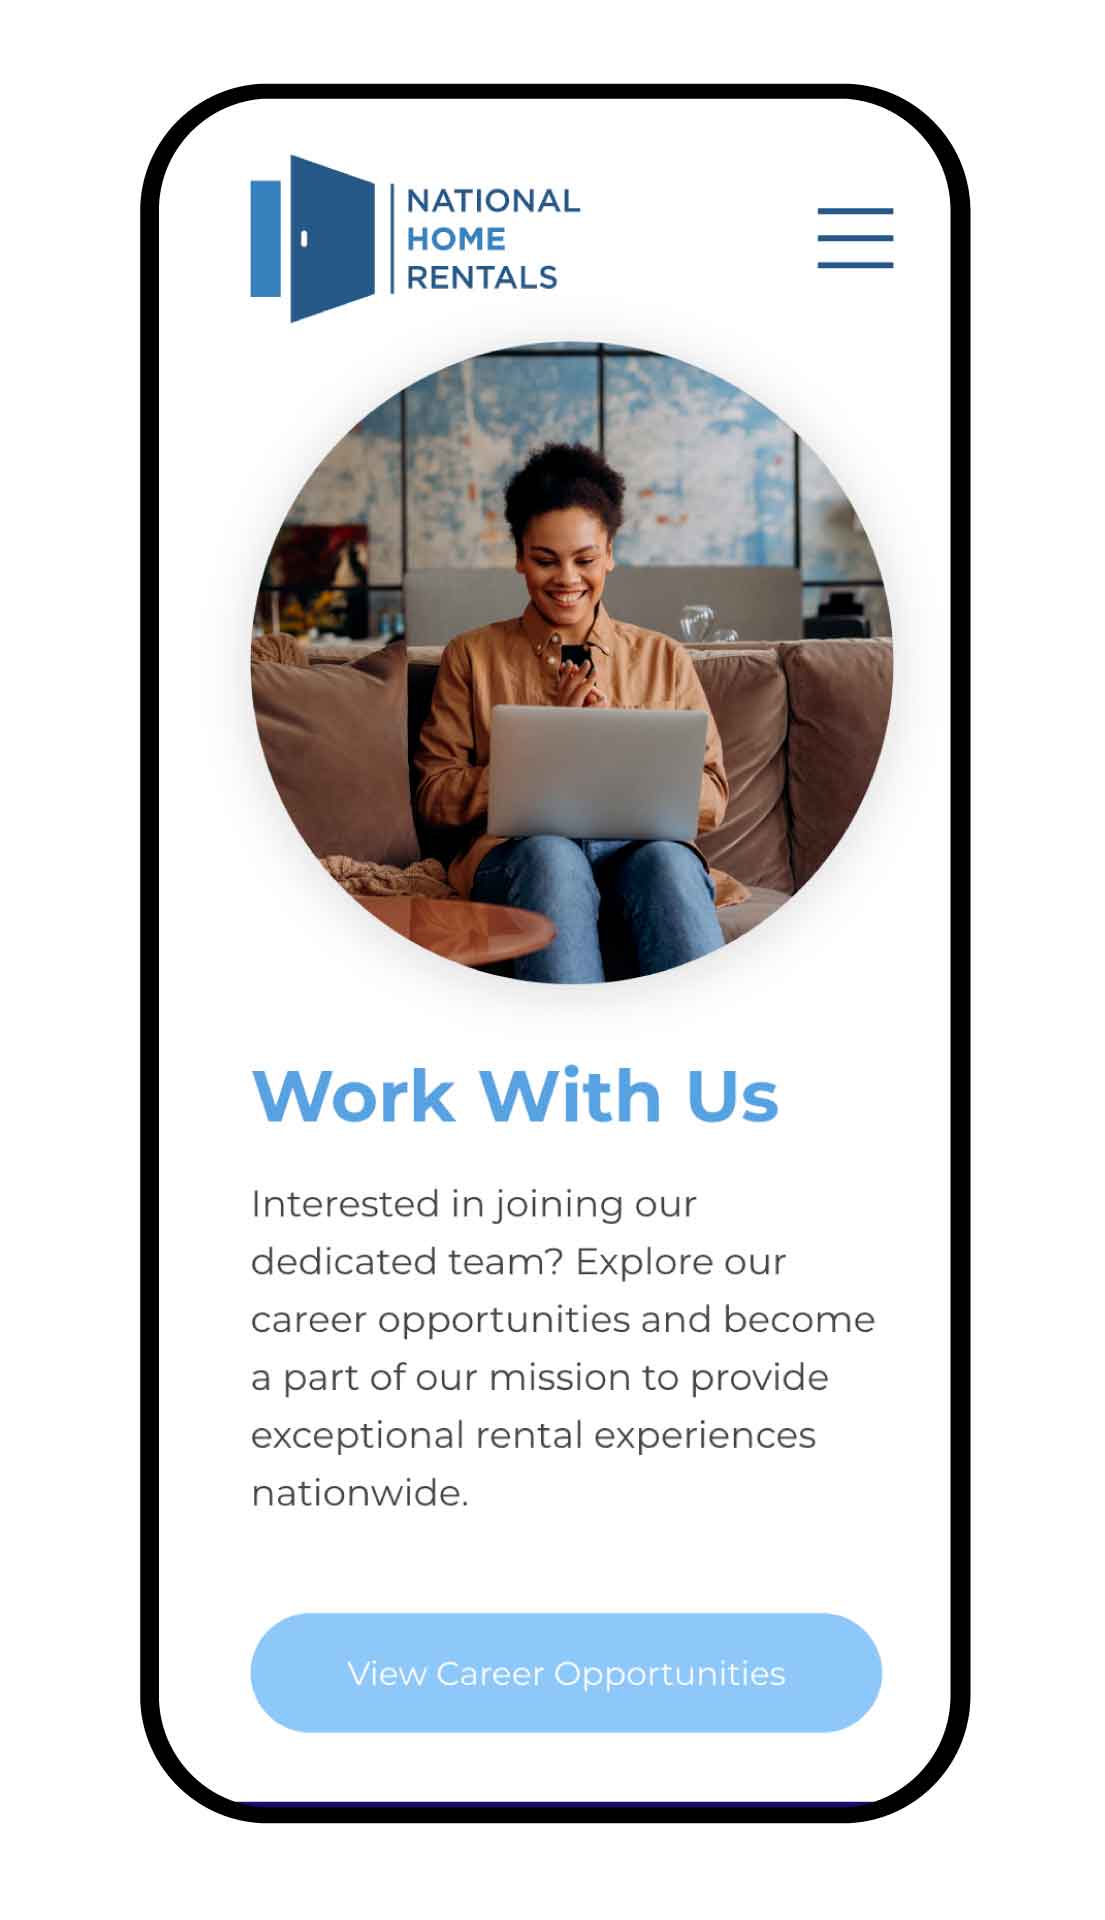 A person smiles while using a laptop the the featured image for the "Work With Us" page.